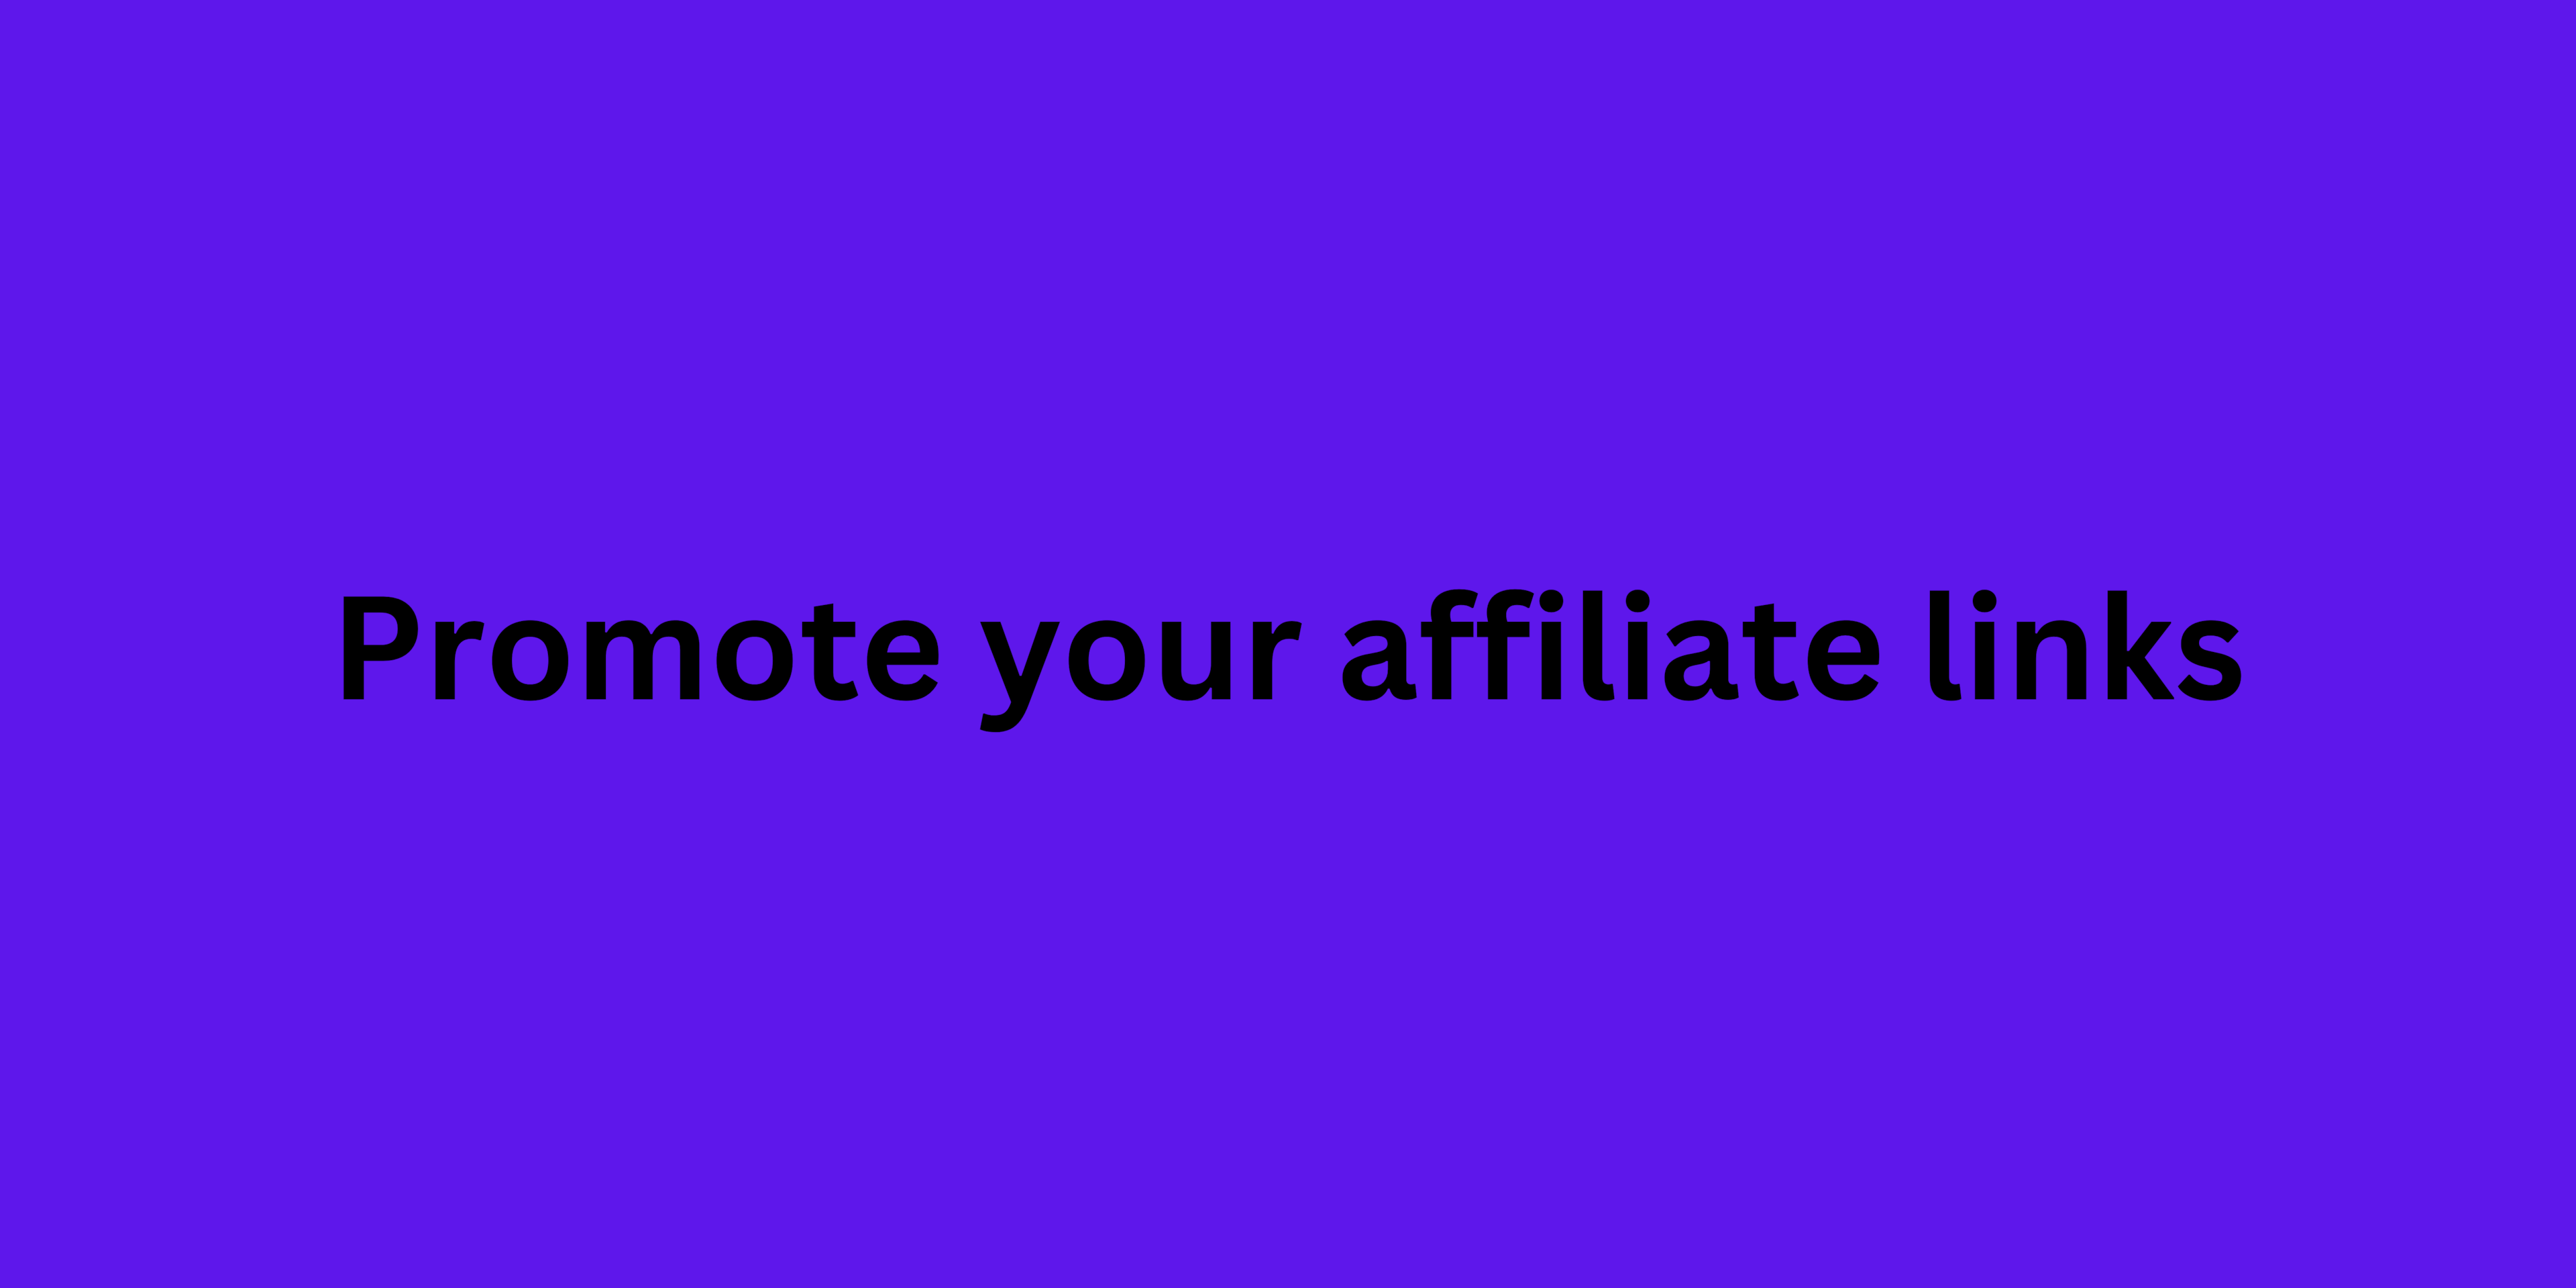 Promote your affiliate links